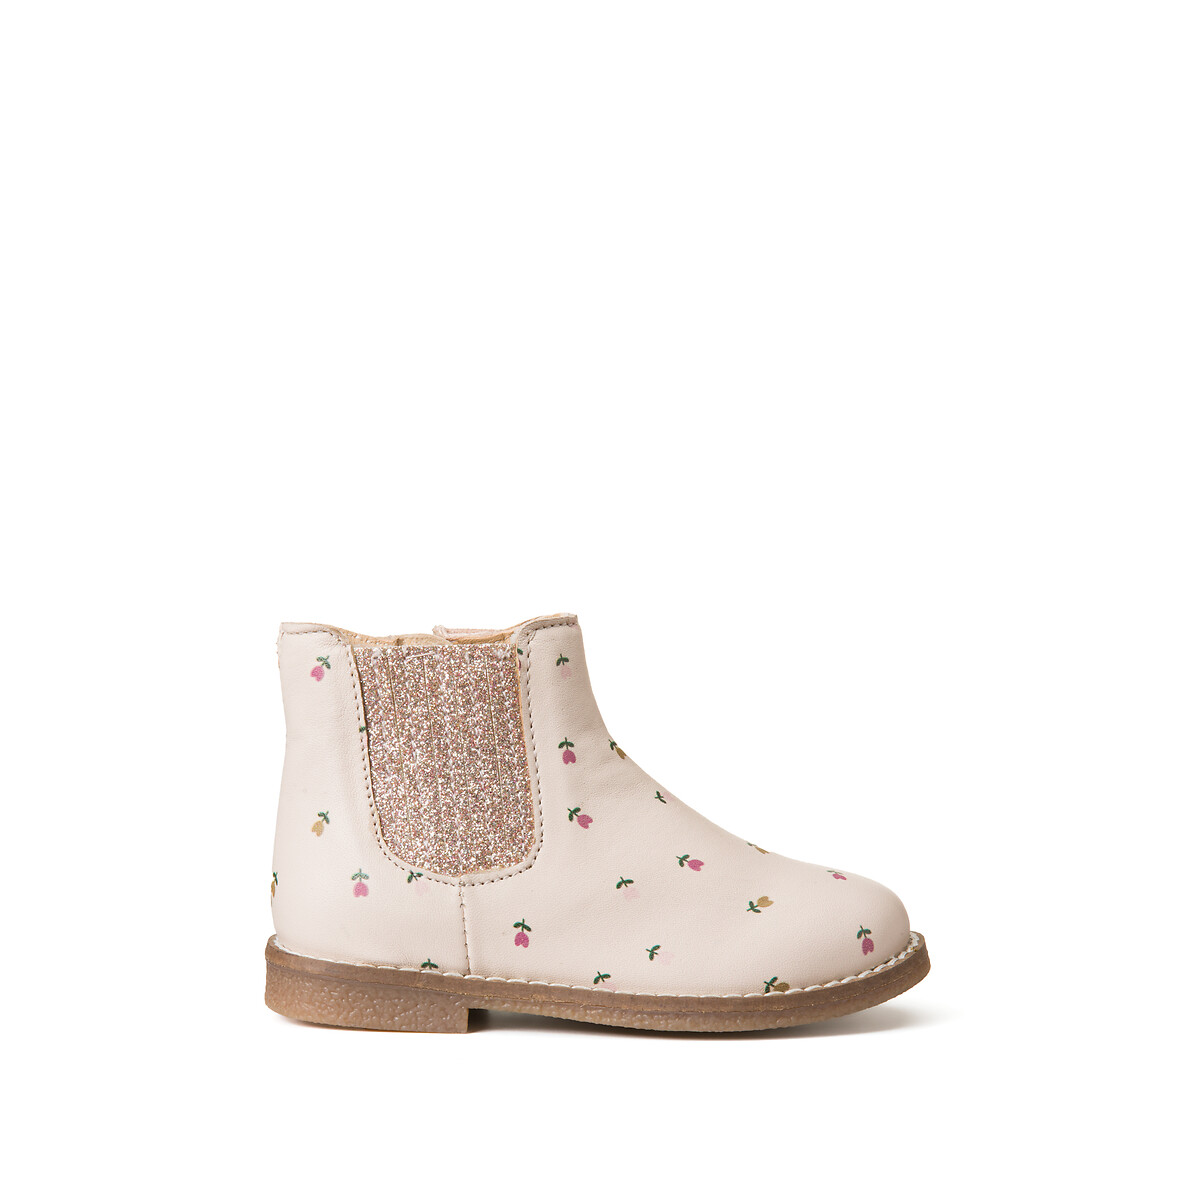 Kids’ Chelsea Boots in Floral Print Leather